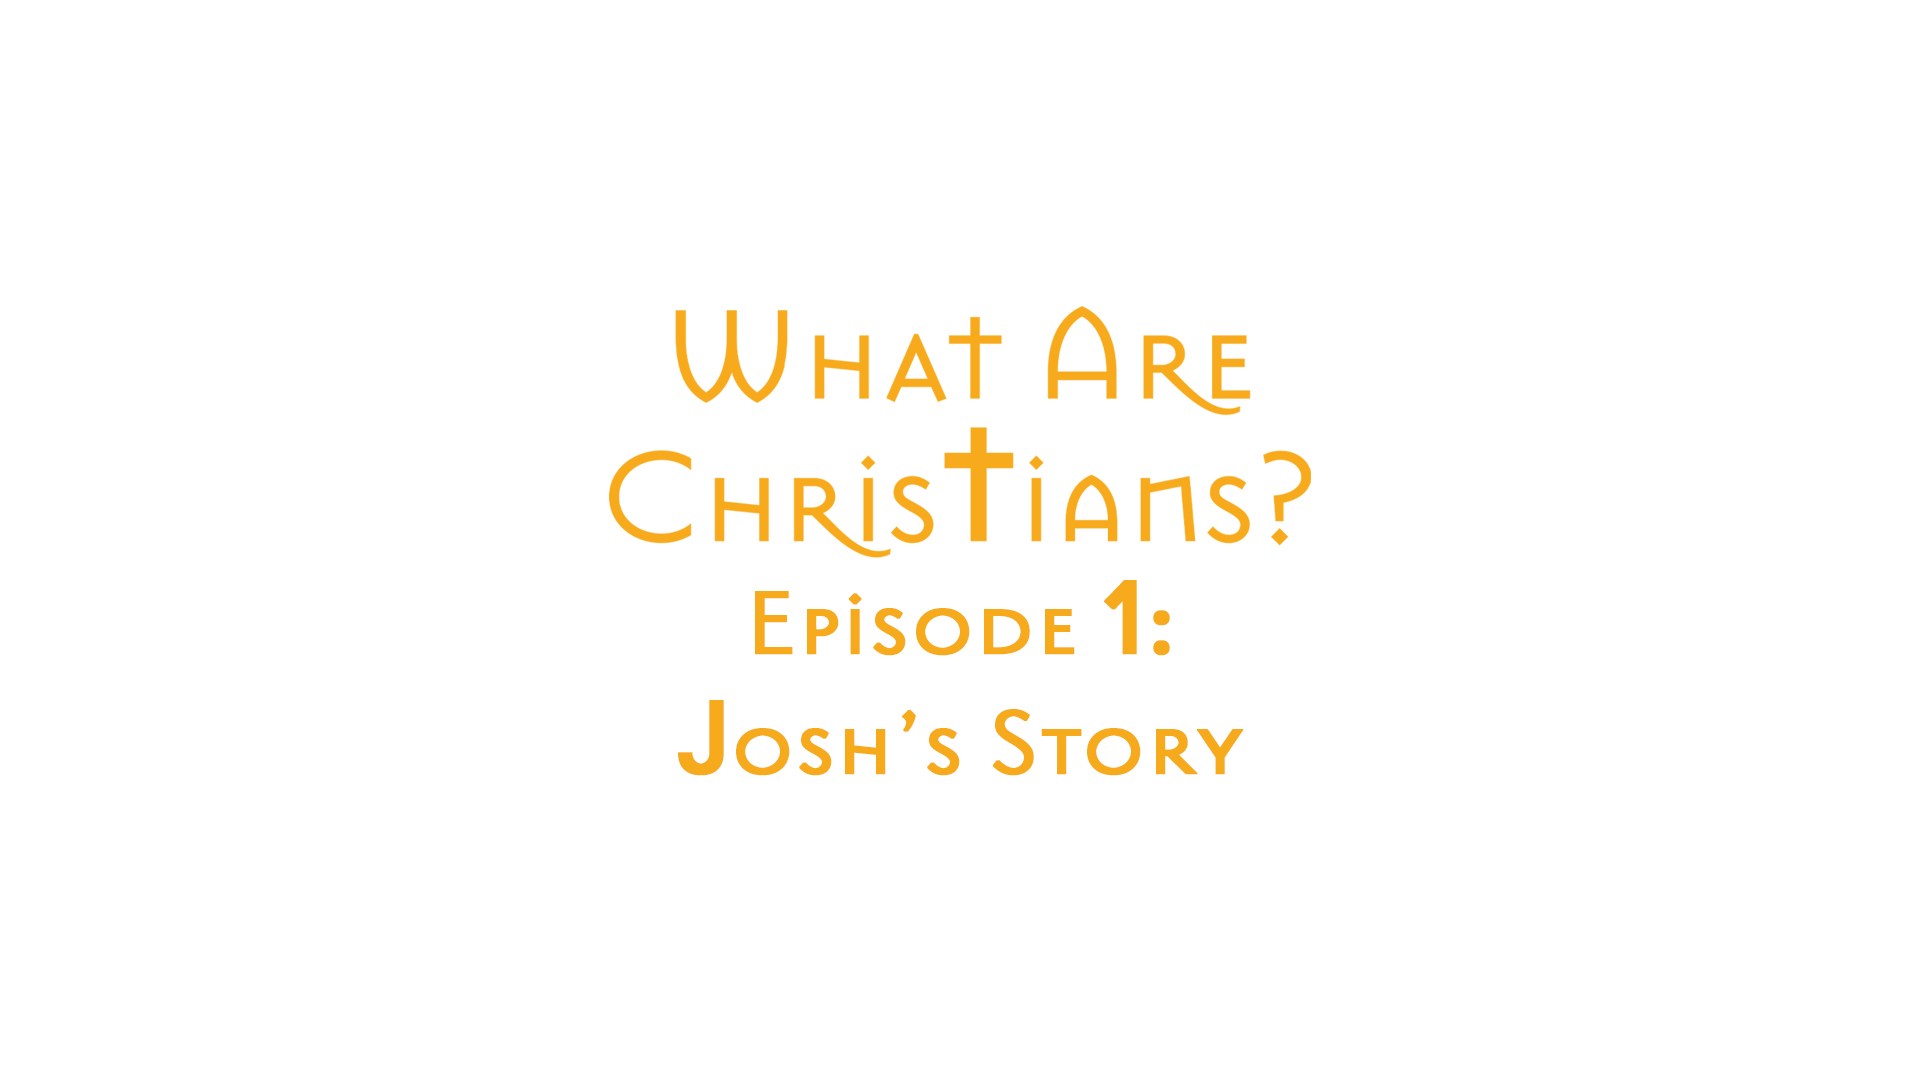 What Are Christians? Episode One: Josh's Story by Zack Lawrence